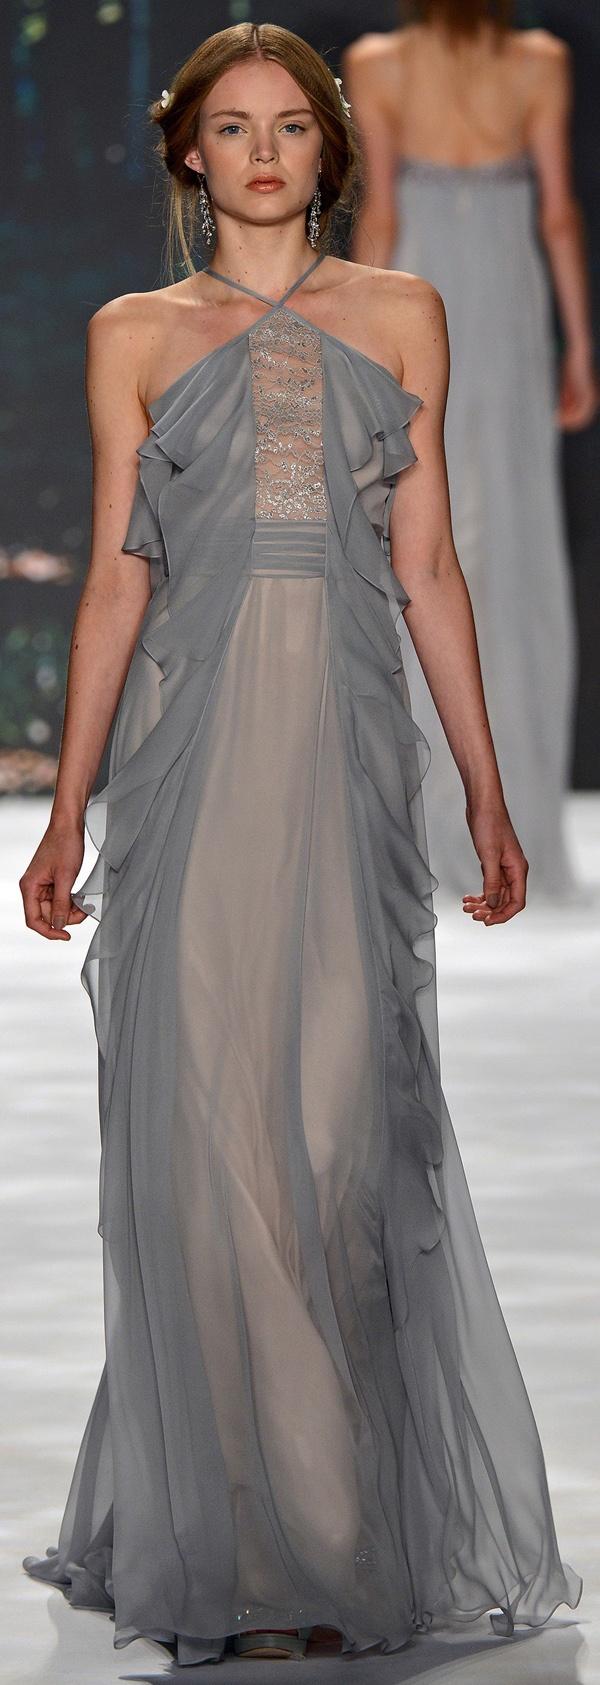 Свадьба - Badgley Mischka Spring 2013 Ready-to-Wear Fashion Show: Complete Collection